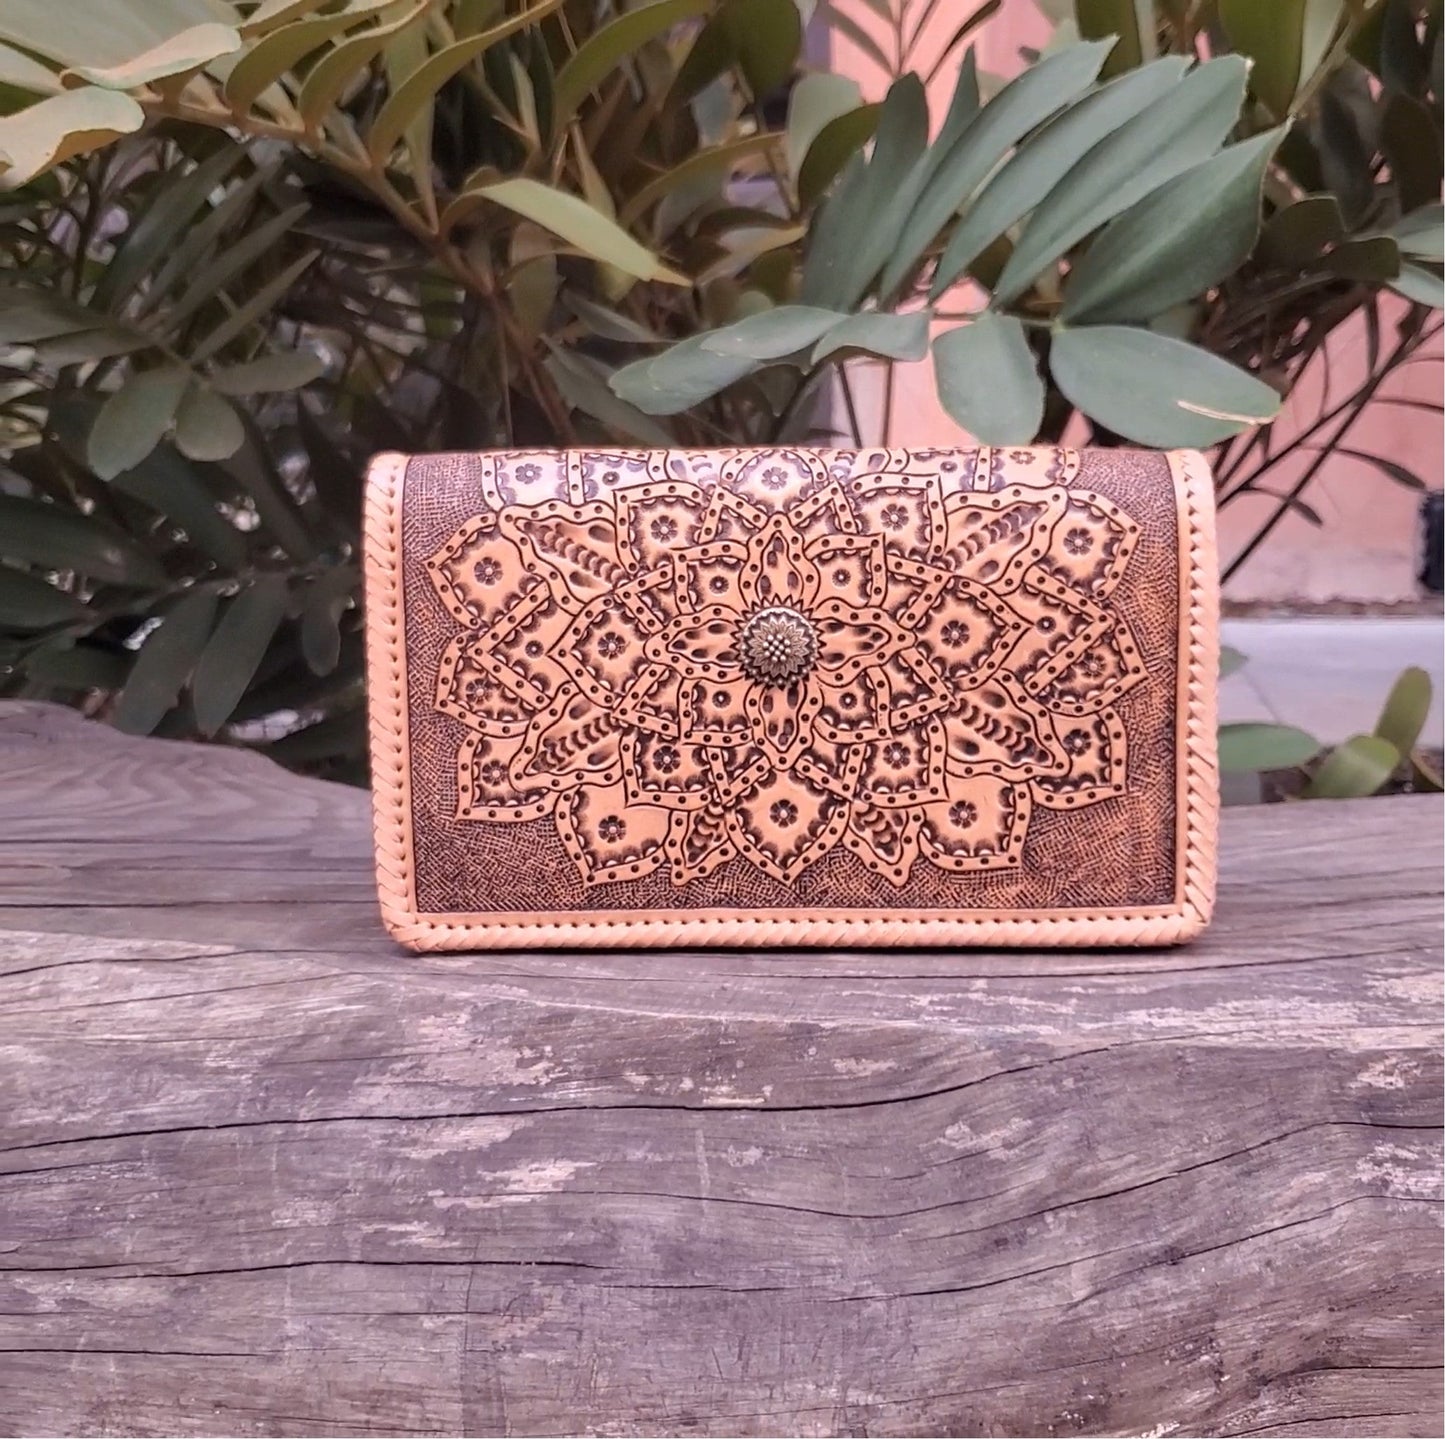 Hand Made Leather Crossbody Bag "CECELIA" by MIOHERMOSA Brown Cecilia Mayan Flower